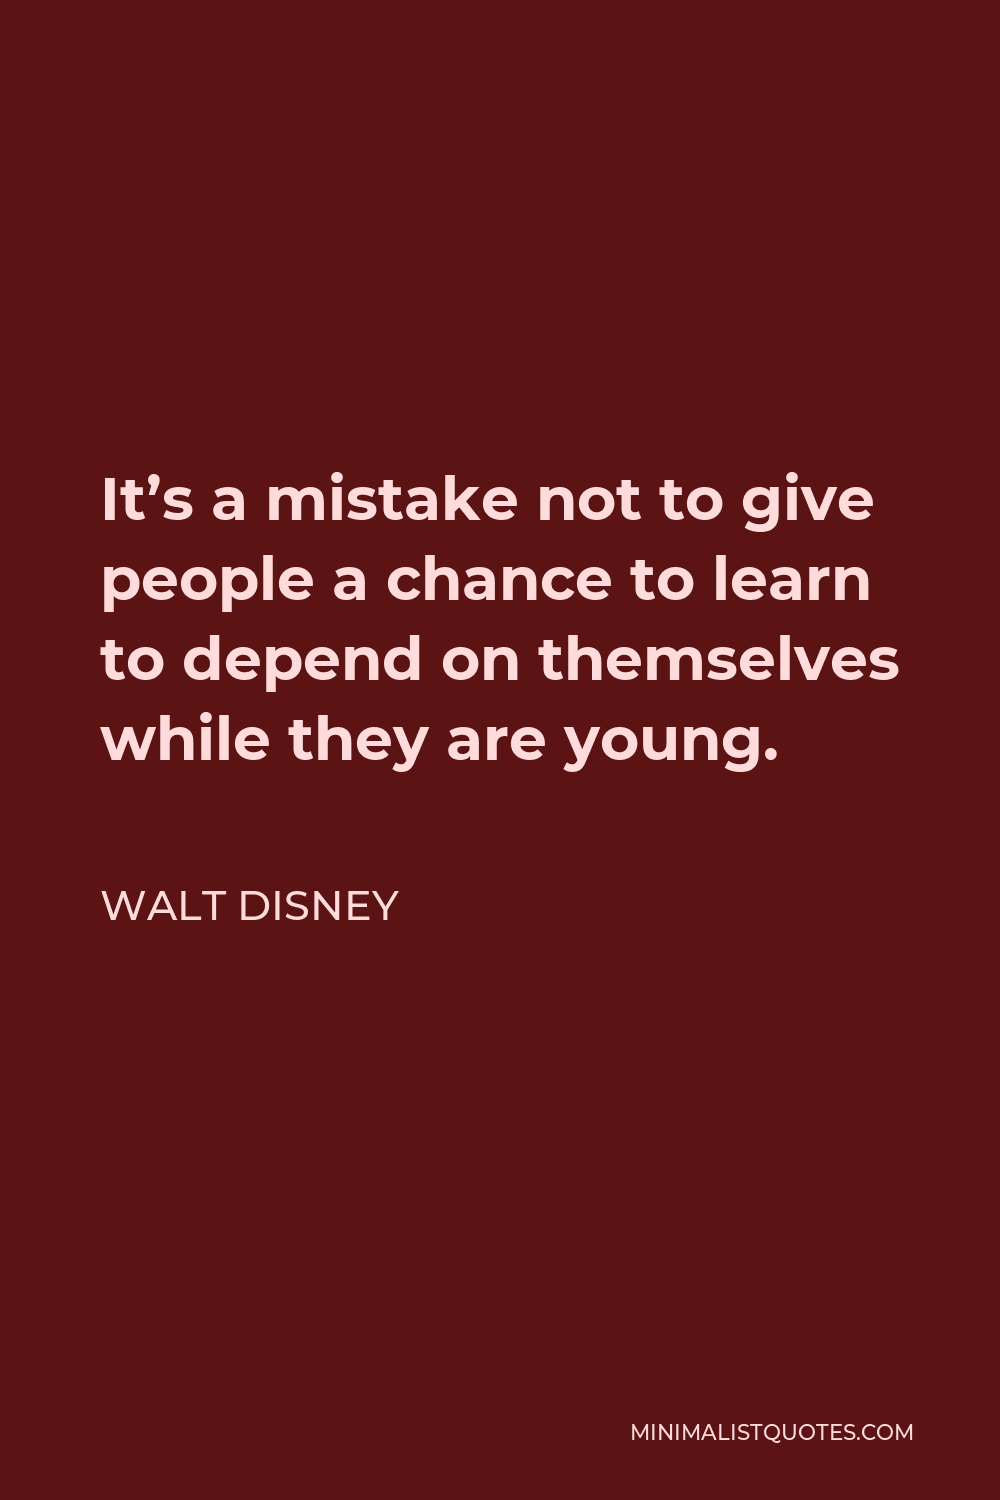 Walt Disney Quote - It’s a mistake not to give people a chance to learn to depend on themselves while they are young.